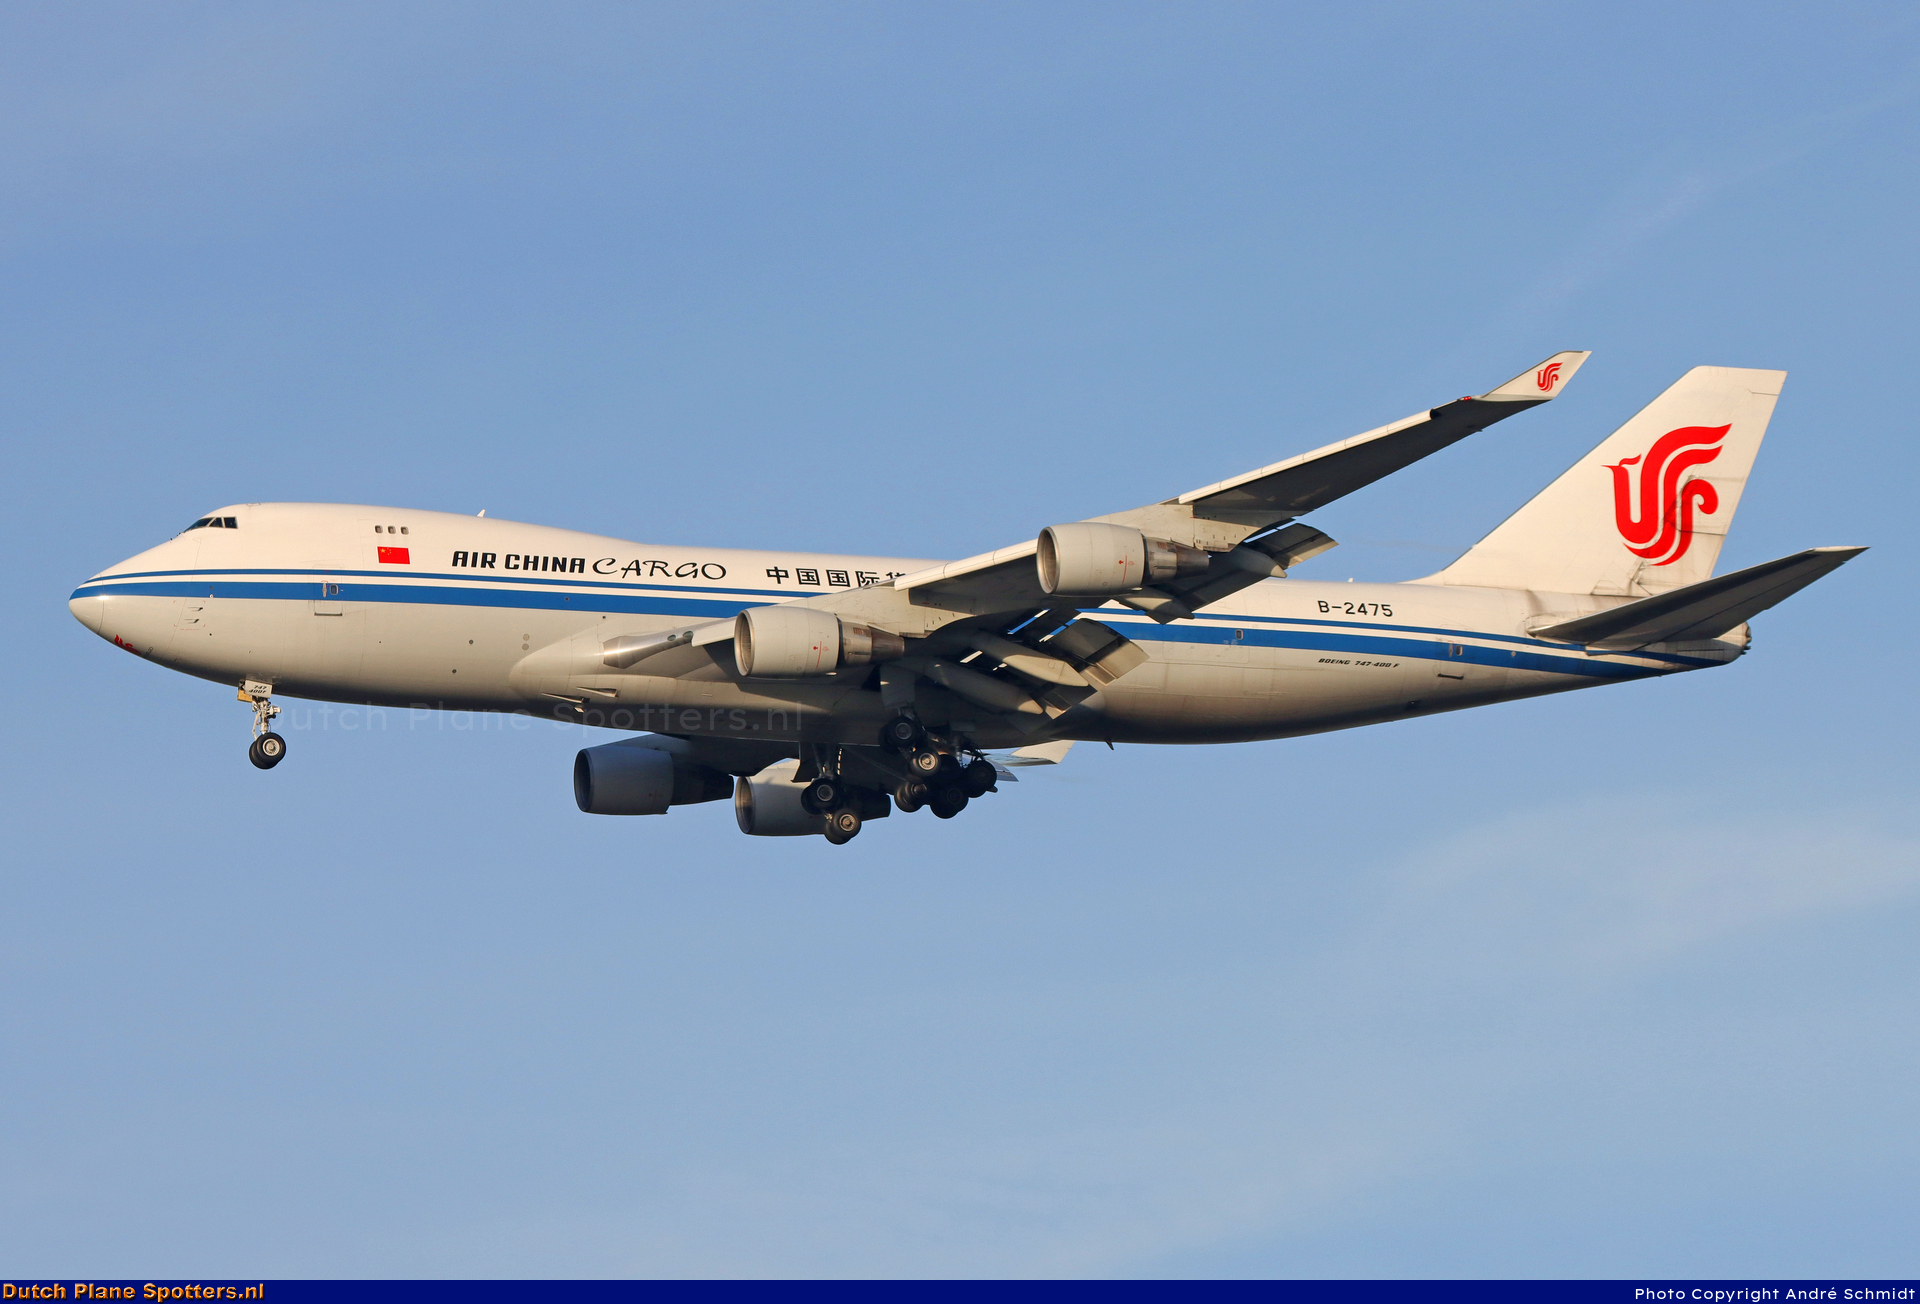 B-2475 Boeing 747-400 Air China Cargo by André Schmidt